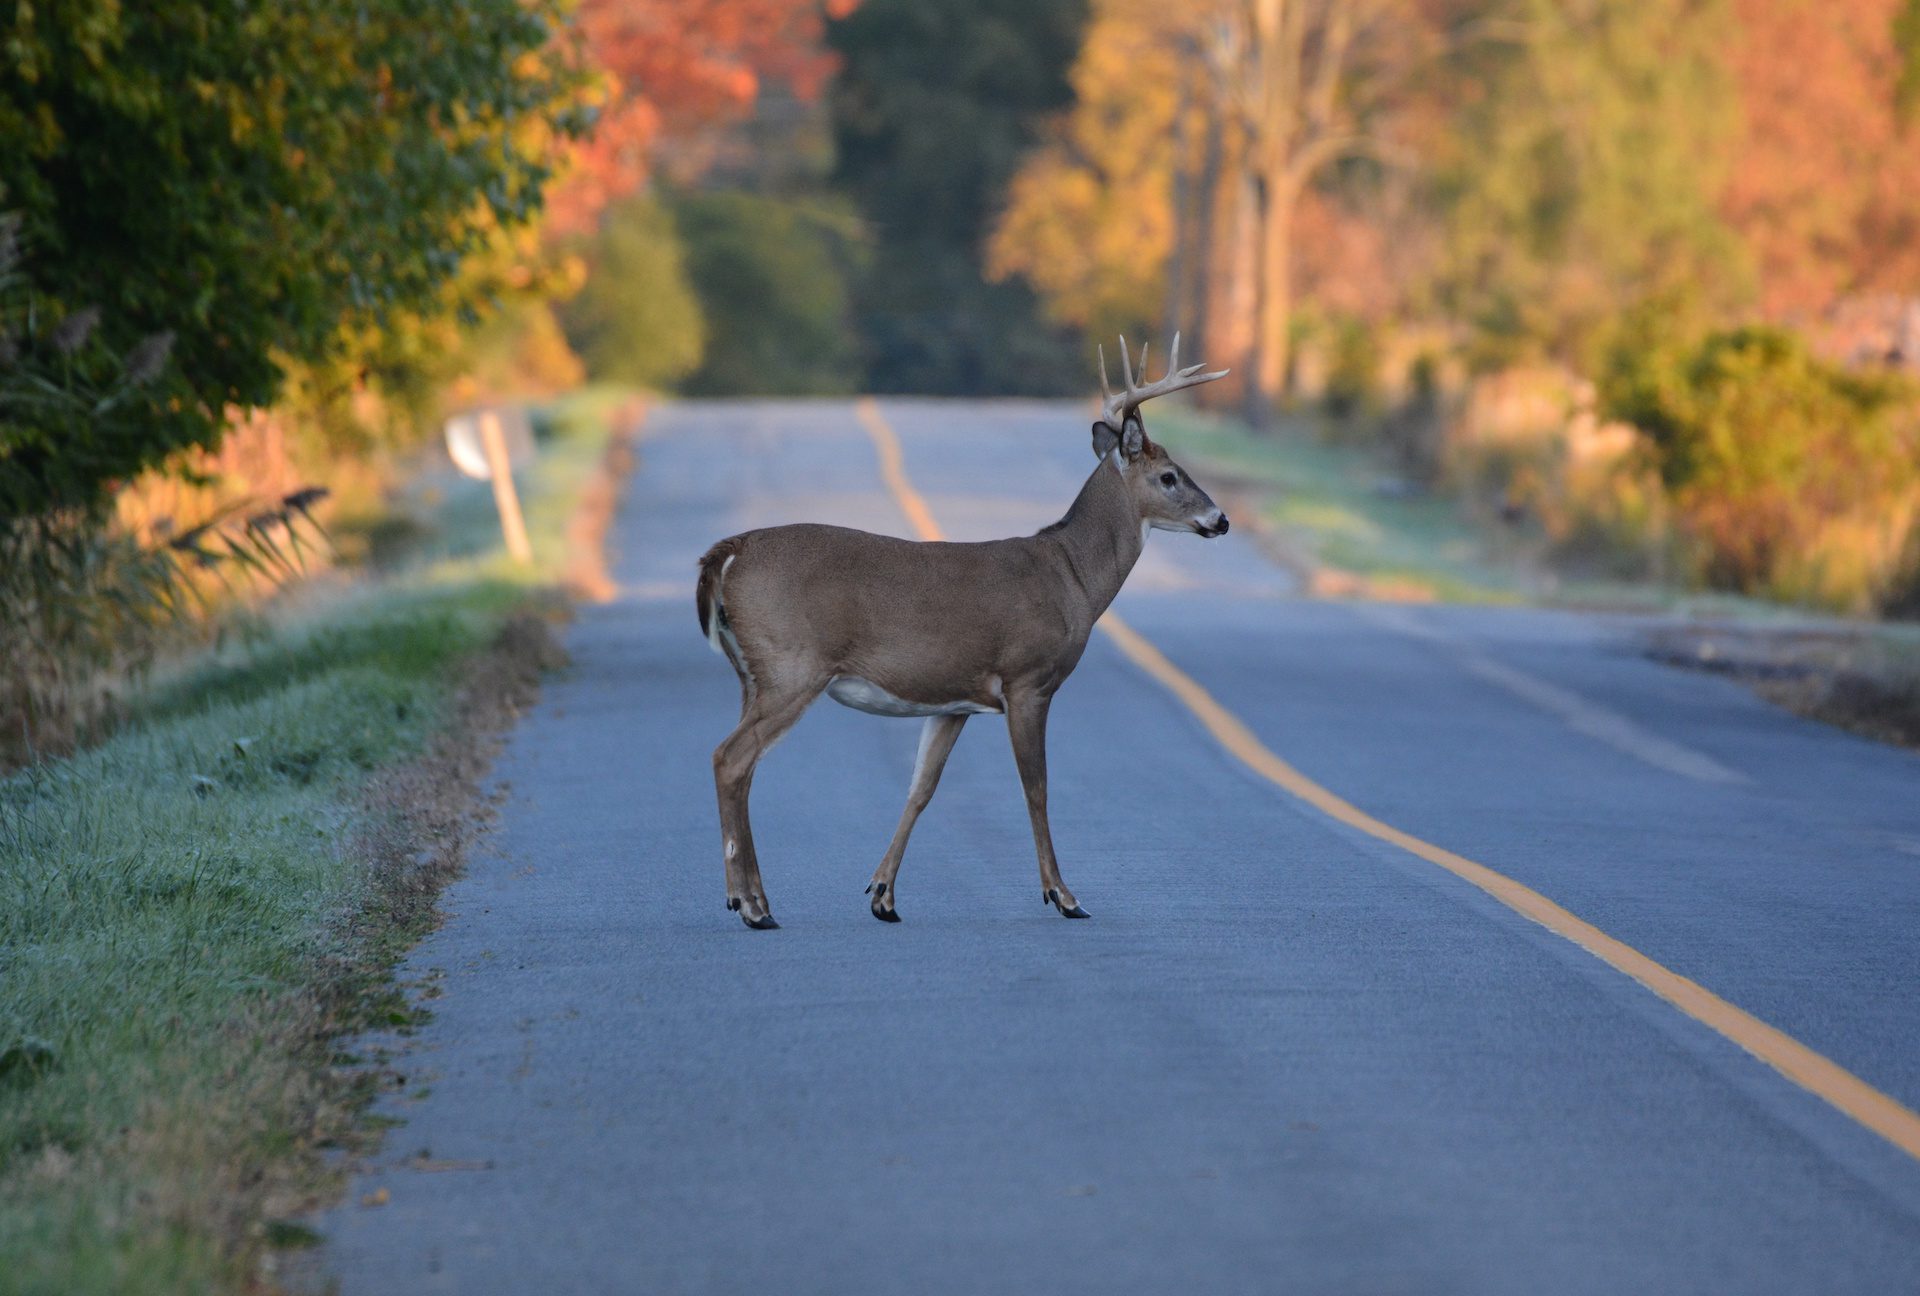 How to avoid deer collisions